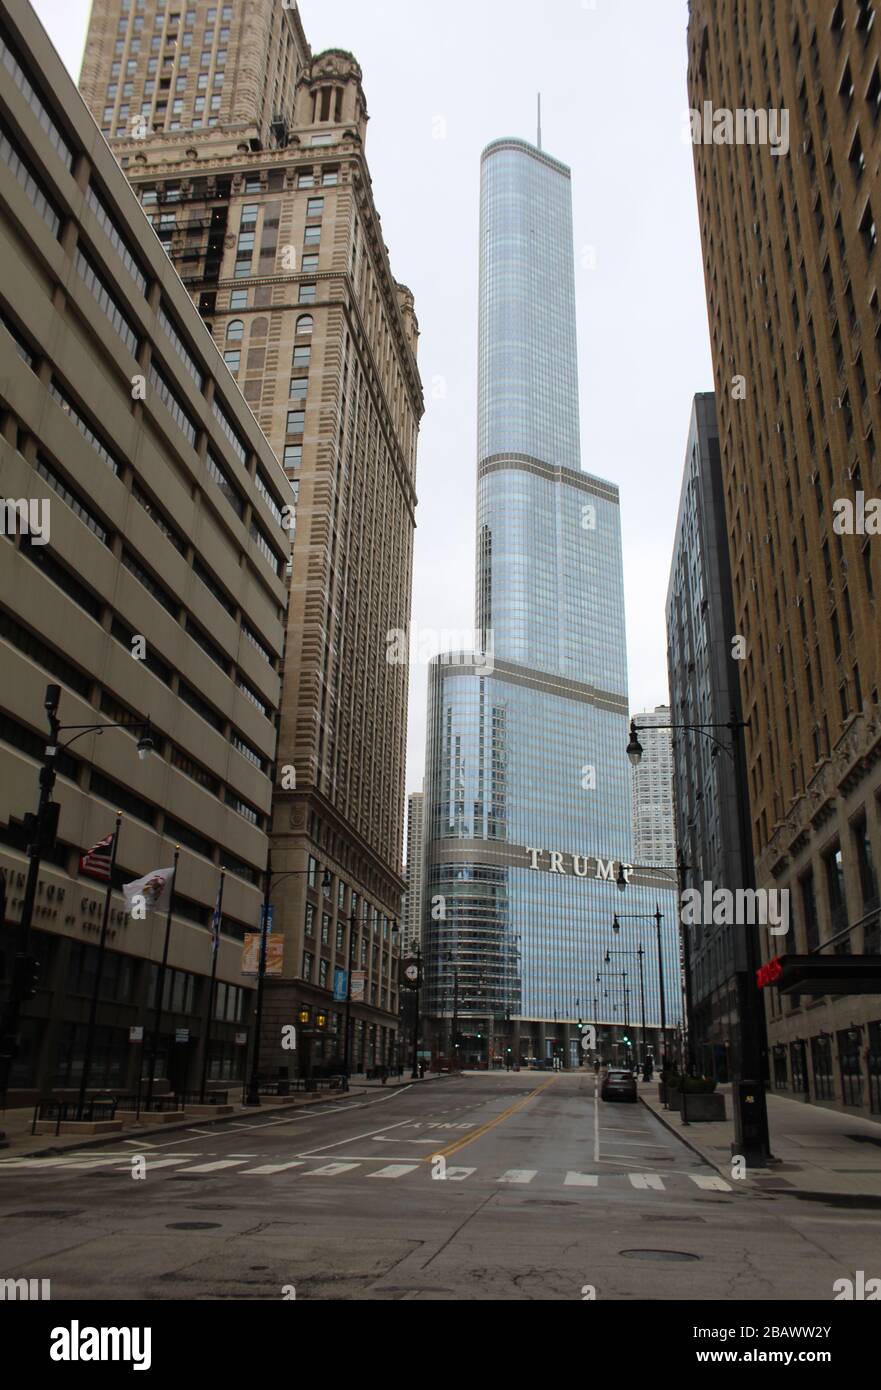 Trump International Hotel & Tower Chicago and other buildings on Wabash Avenue during the 2020 shelter-in-place order Stock Photo